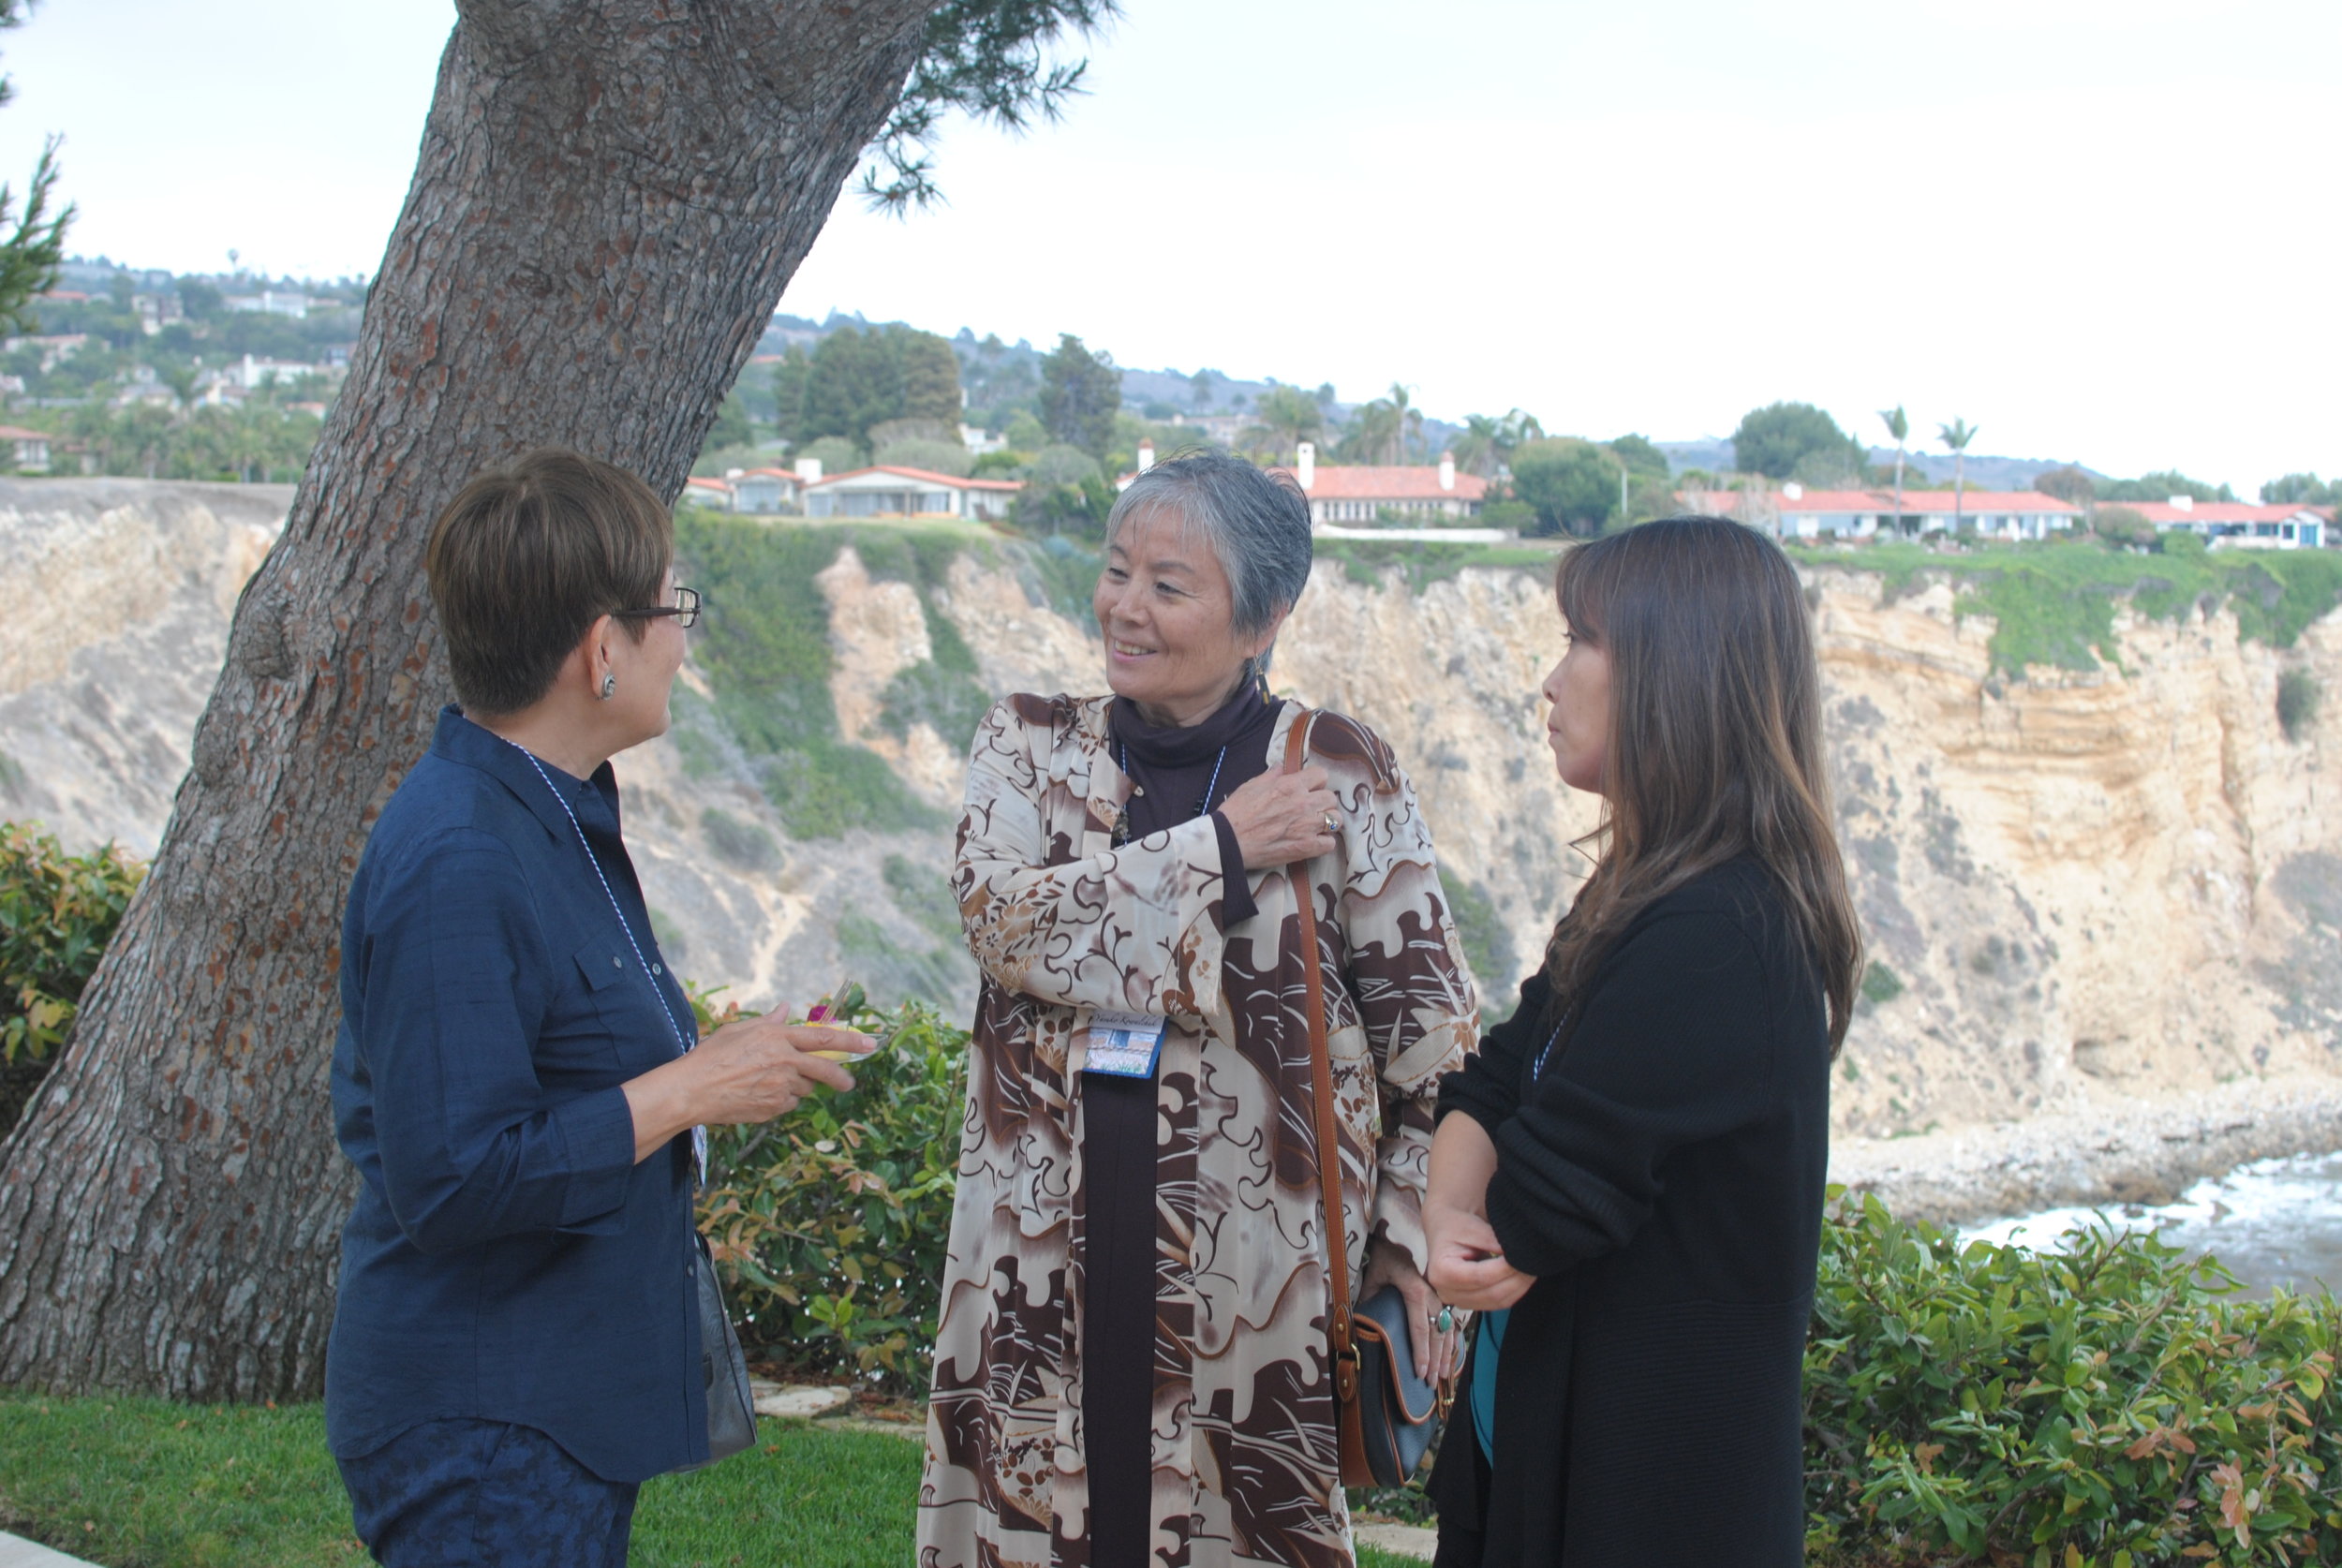 Three women gather and speak on the lawn with the cliff and water in the background. 